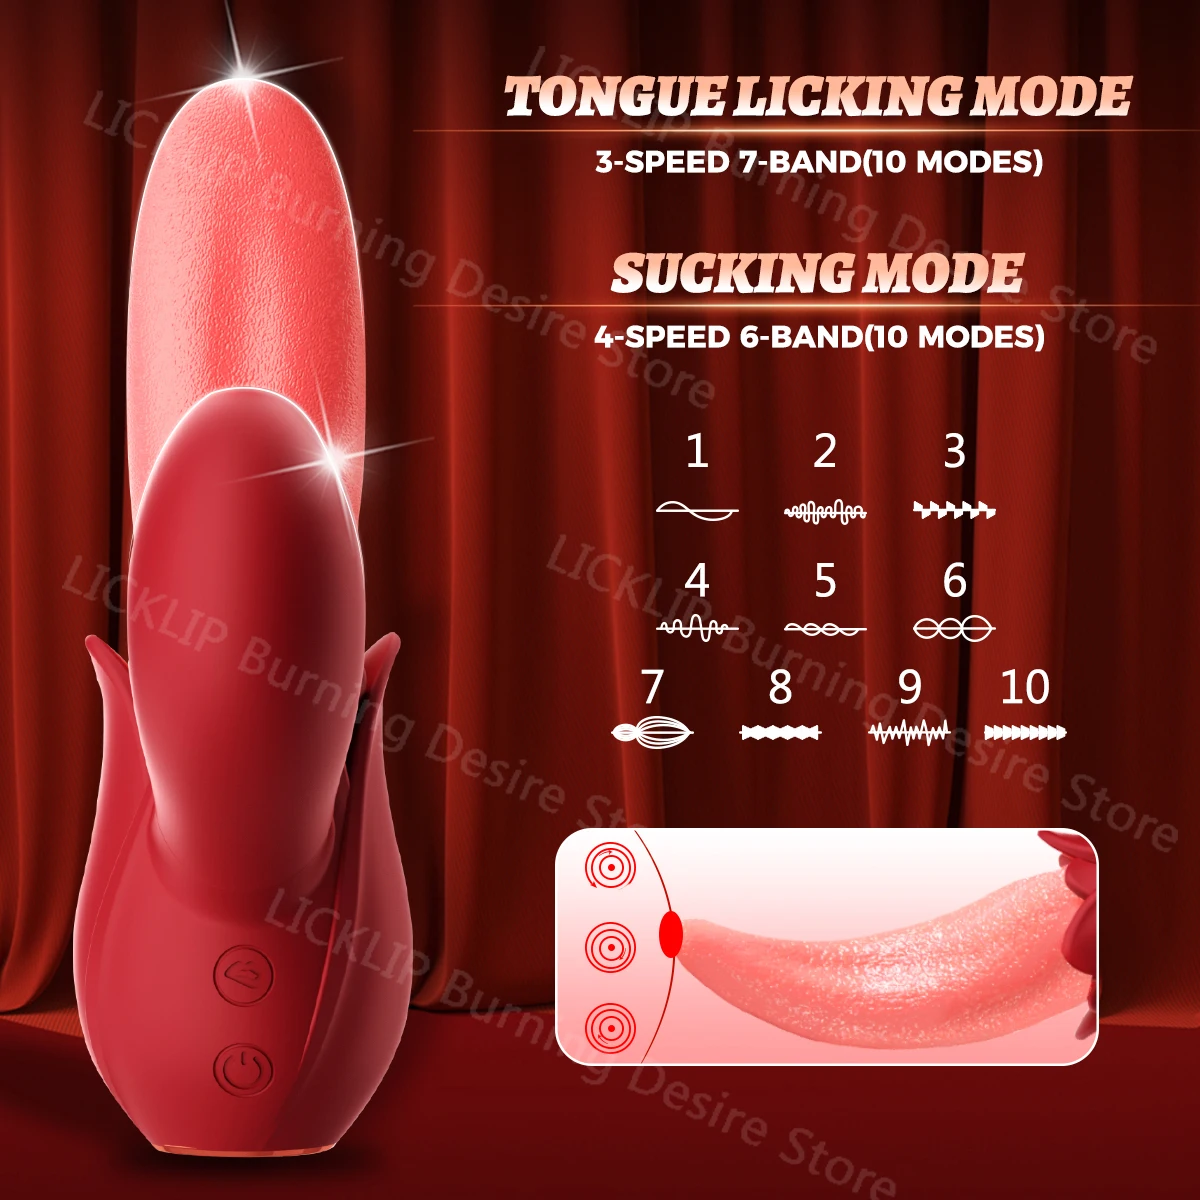 2 in 1 Sucking Rose Vibrator For Women Double Stimulation Clitoris Stimulator Tapping Licking Vagina G Spot Masturbator Sex Toys Trending Now cb5feb1b7314637725a2e7: Red 2 with box